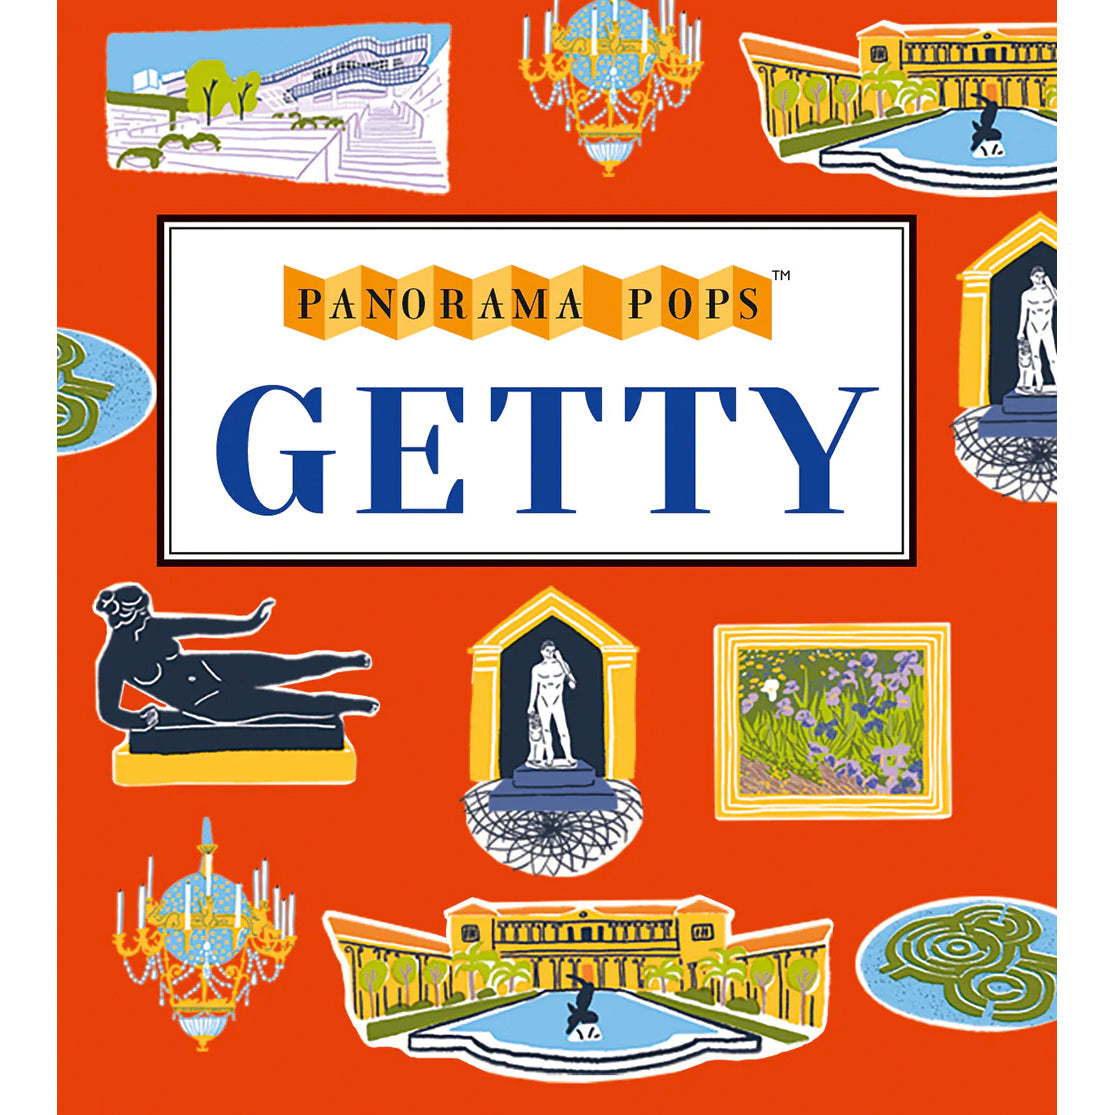 Getty: A 3D Expanding Pocket Guide